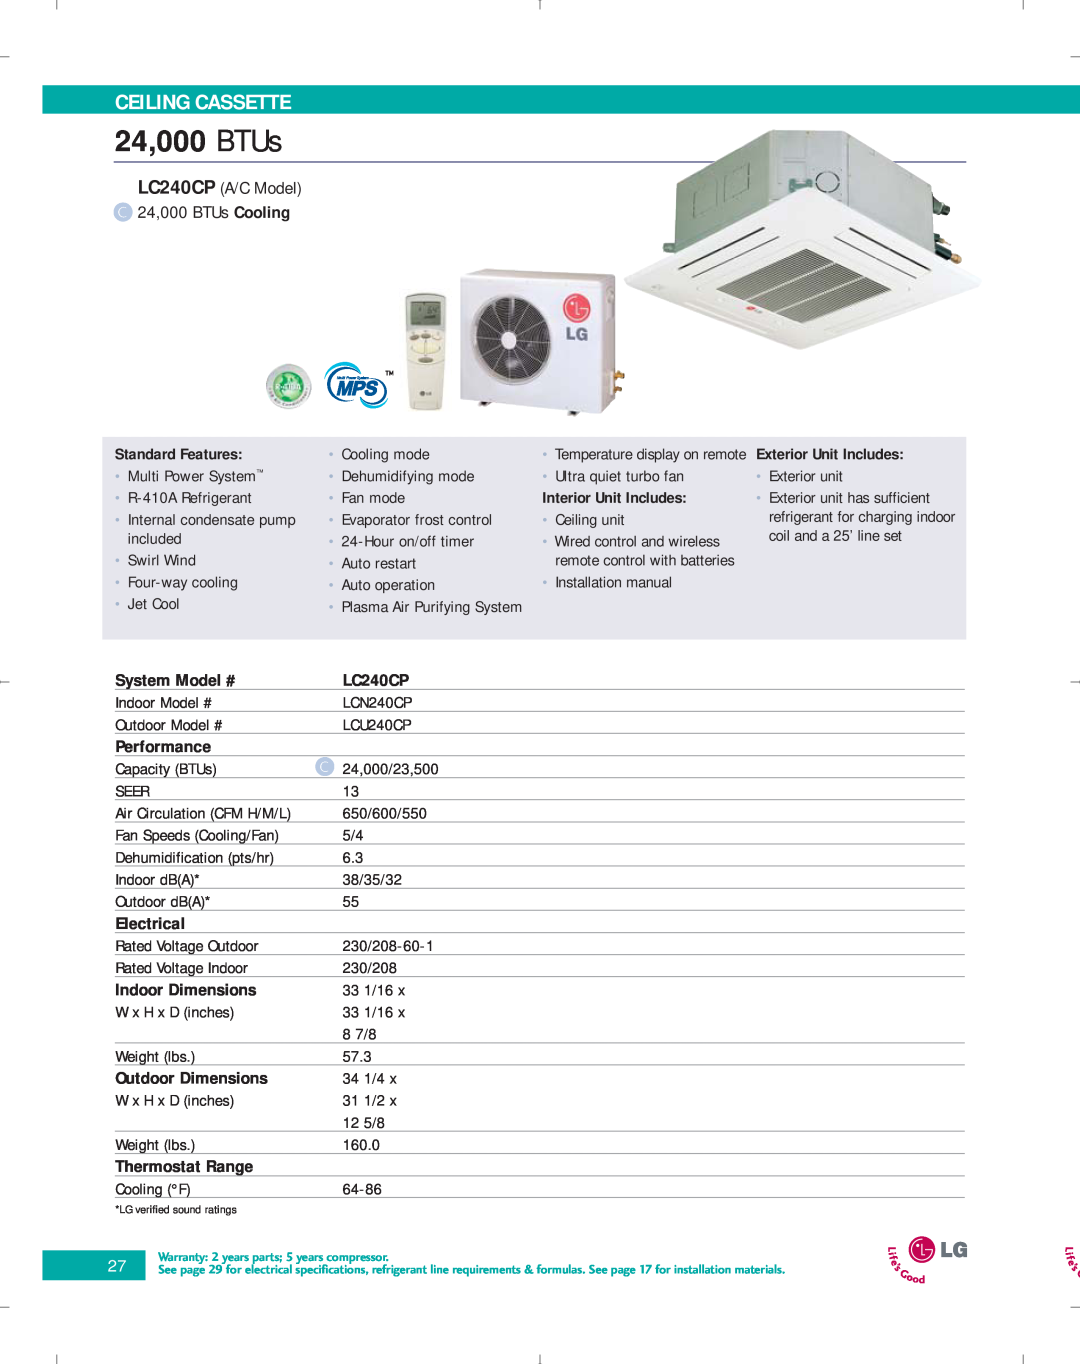 LG Electronics PG-100-2006-VER3 manual Ceiling Cassette, LC240CP, 24,000 BTUs, System Model #, Performance, Electrical 